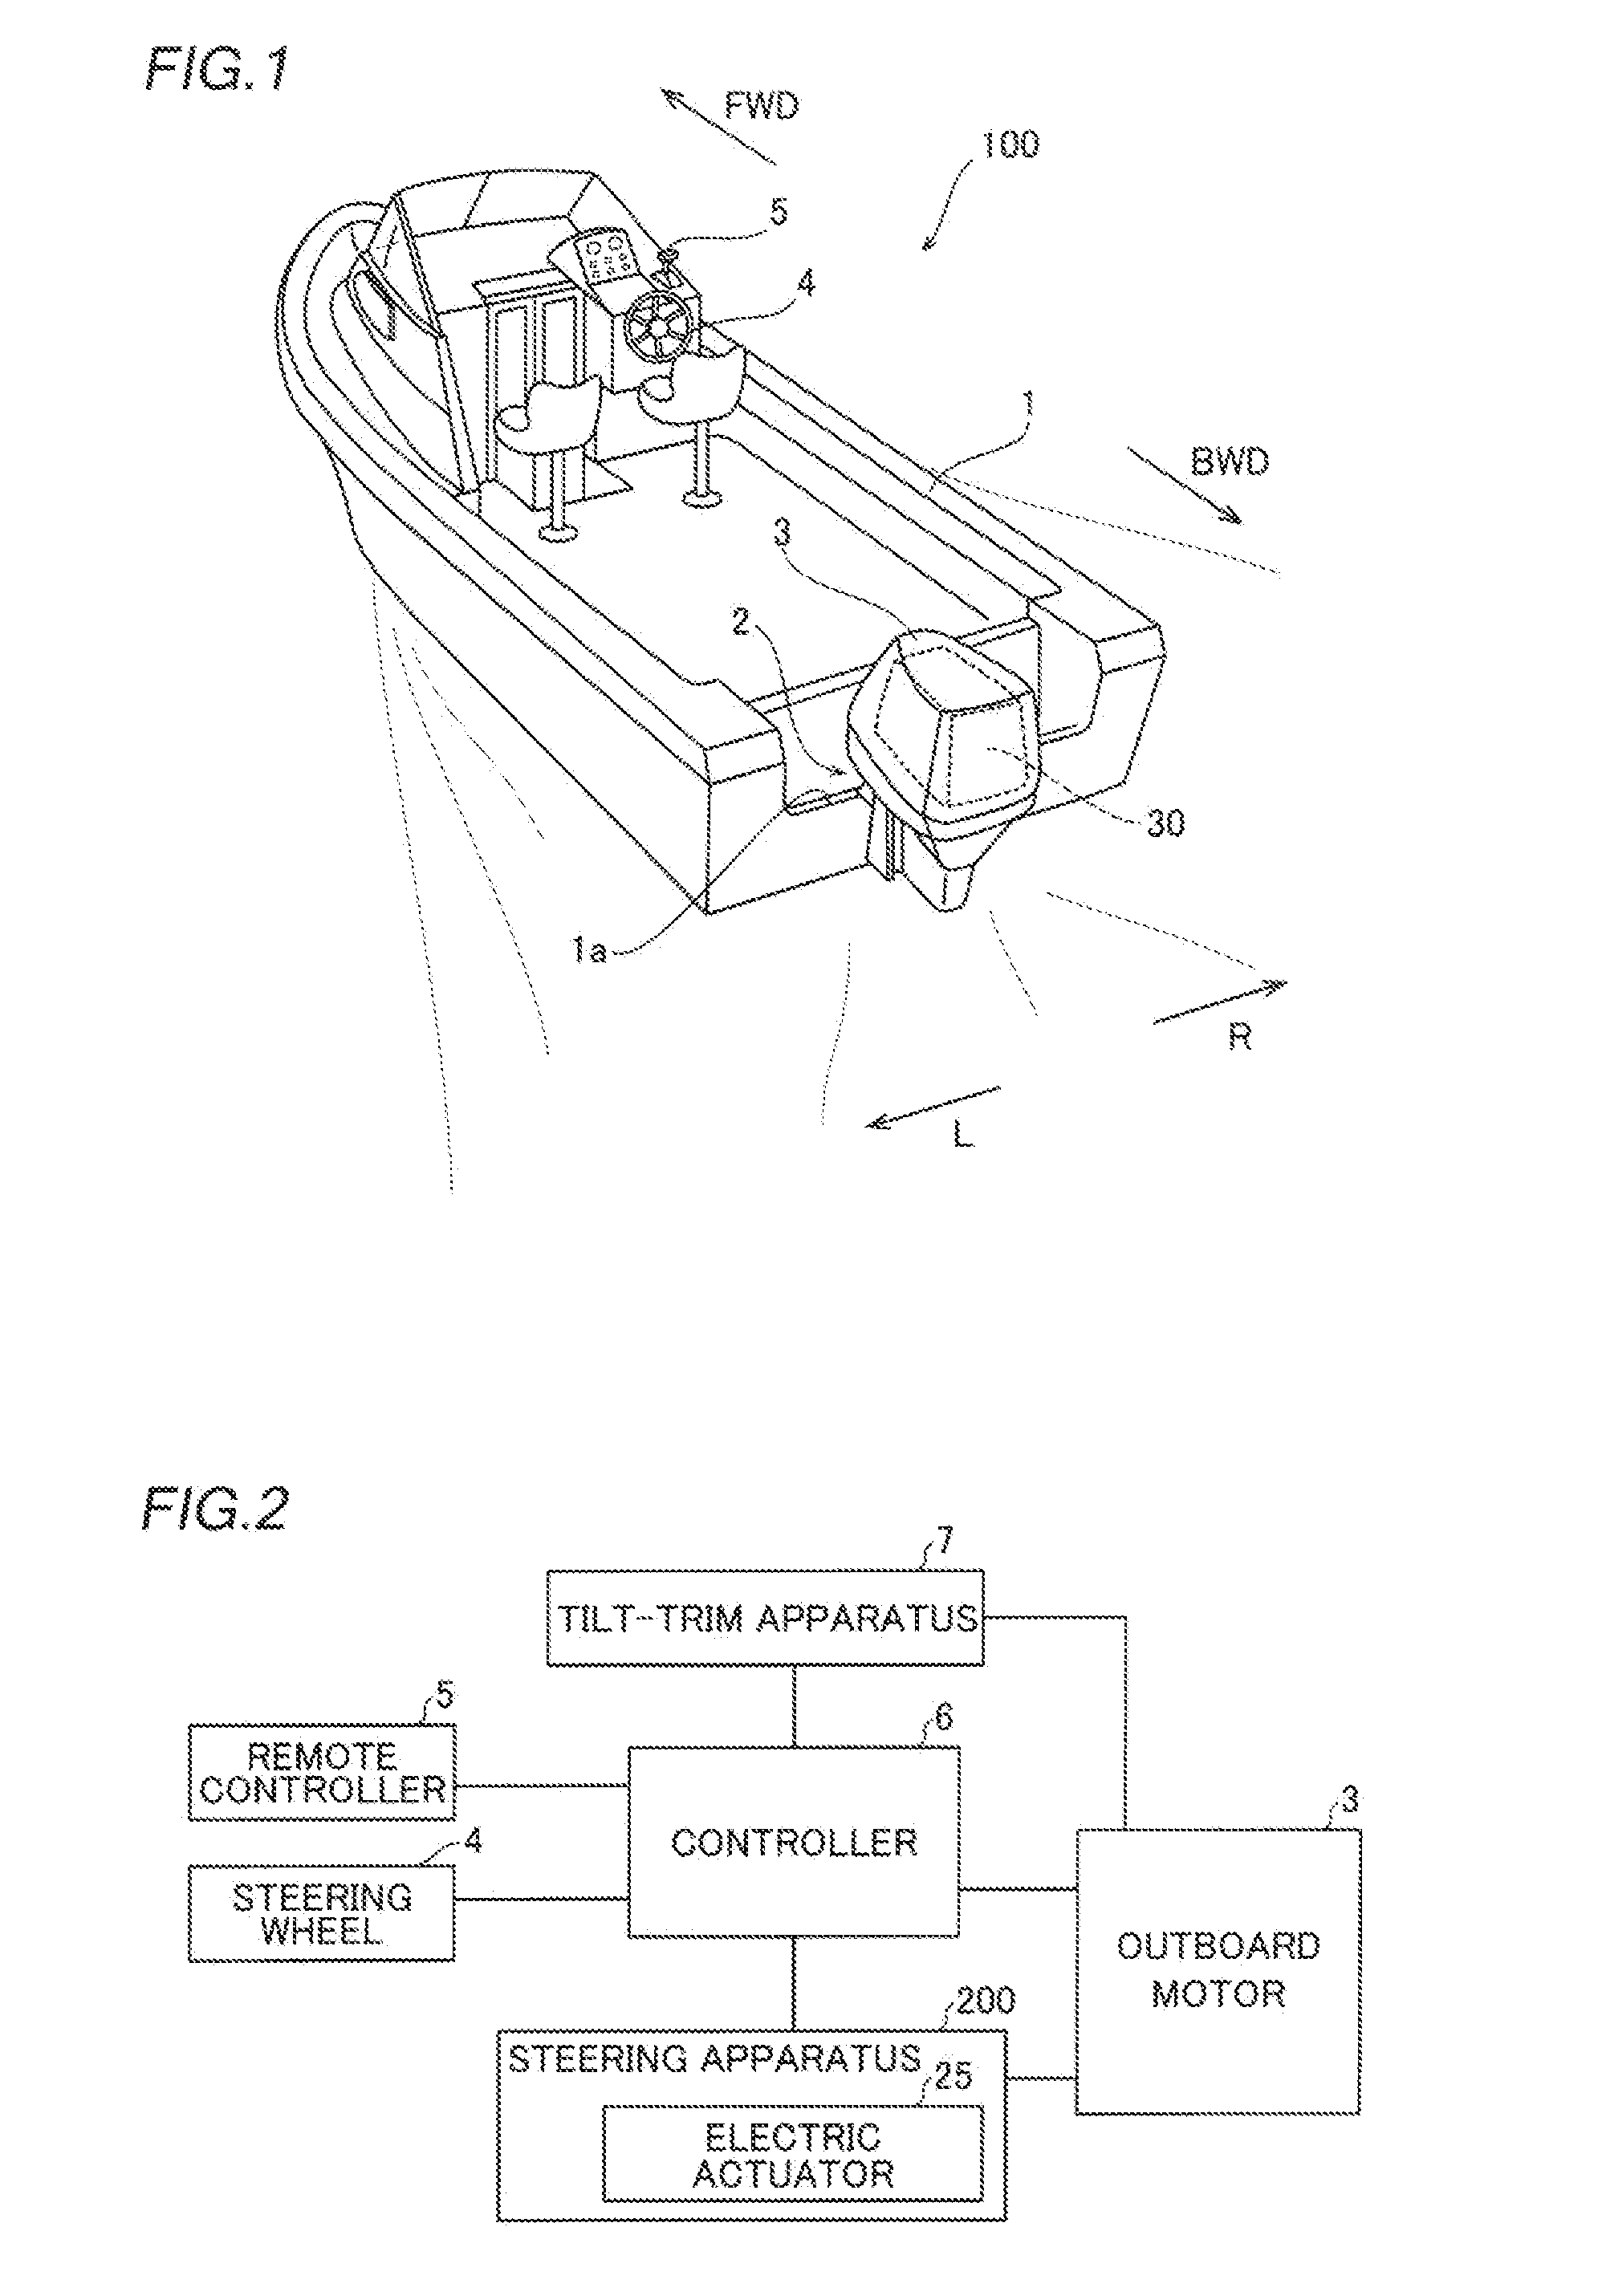 Steering apparatus of outboard motor and outboard motor boat